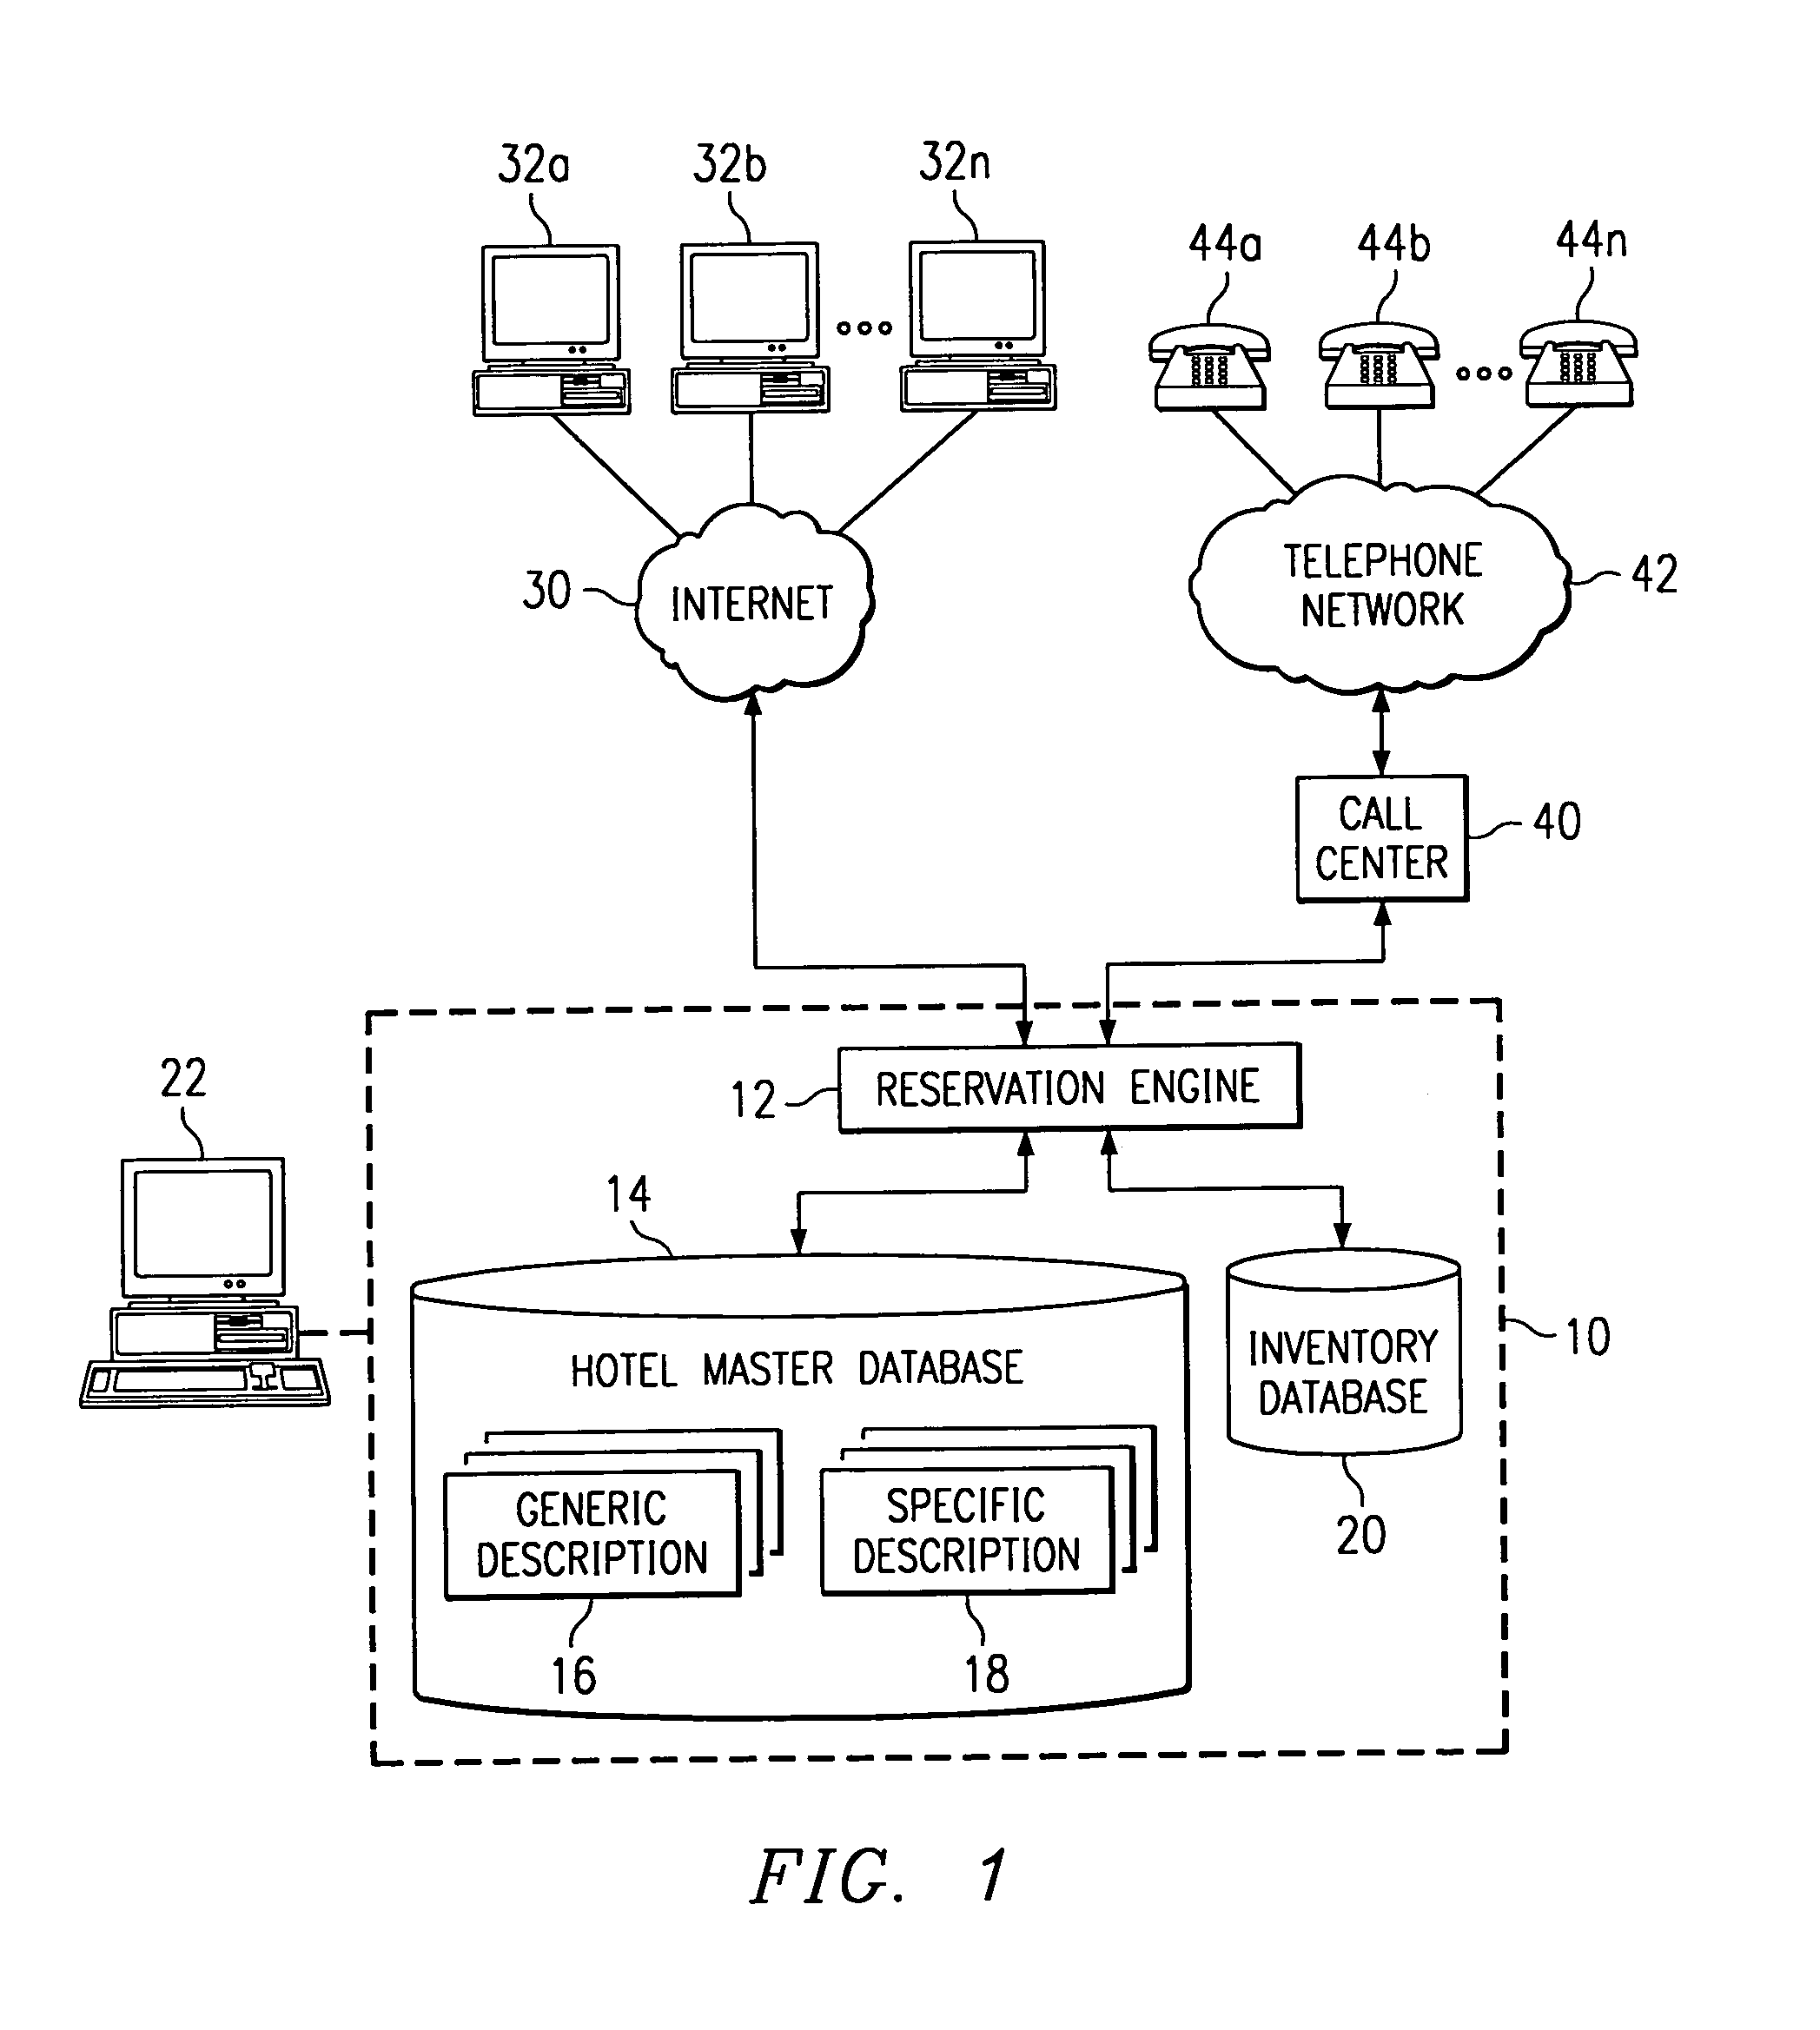 System and method for conducting transactions involving generically identified items